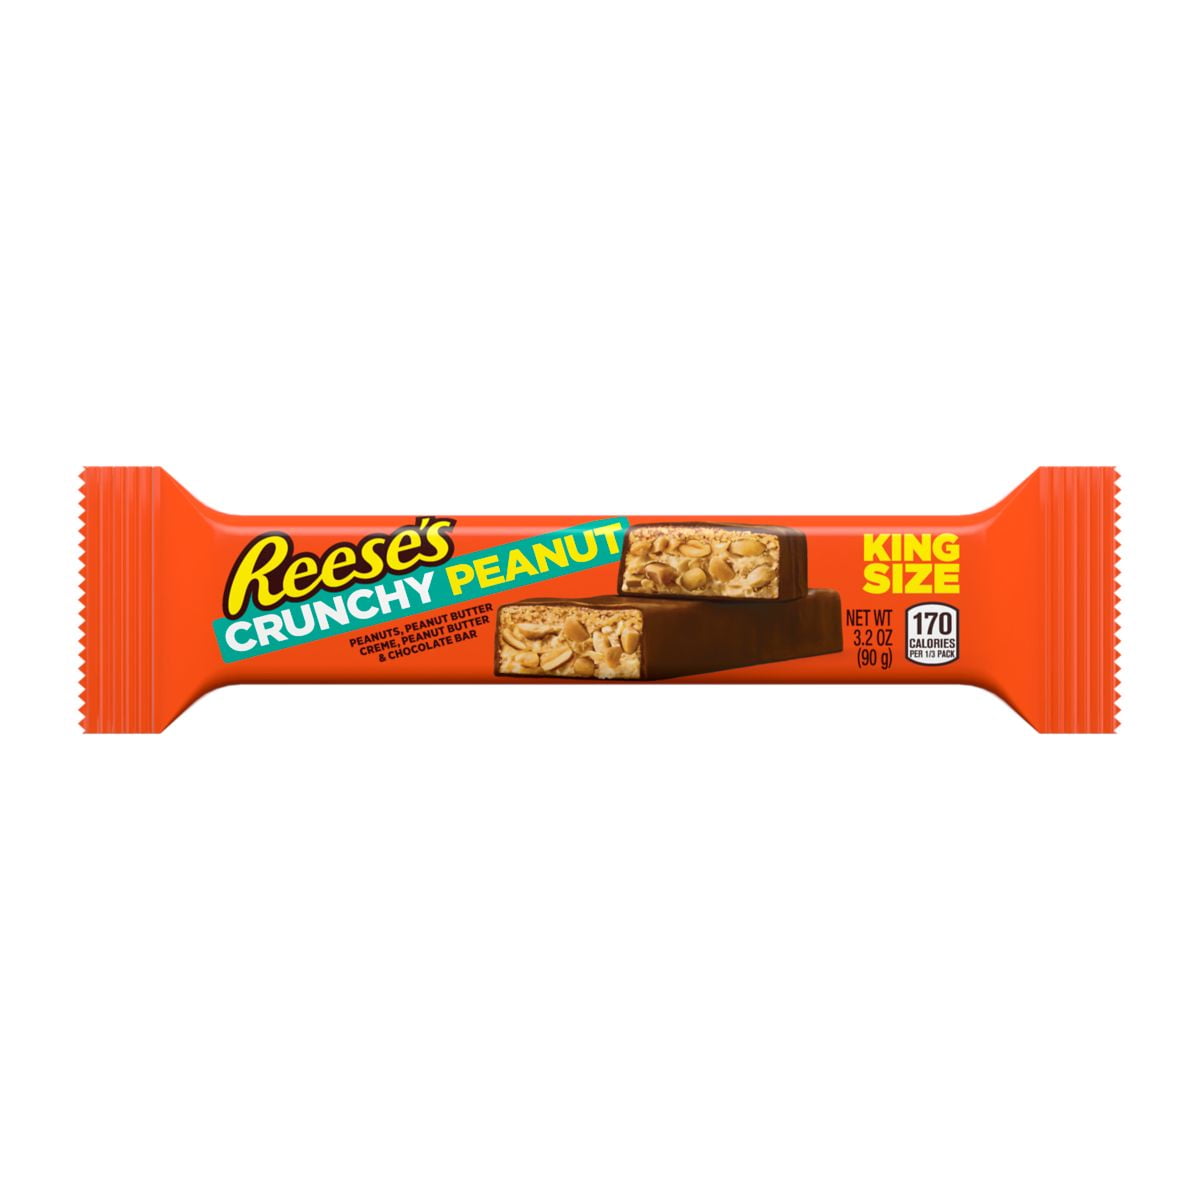 REESE PEANUT LOVER BAR KING SIZE